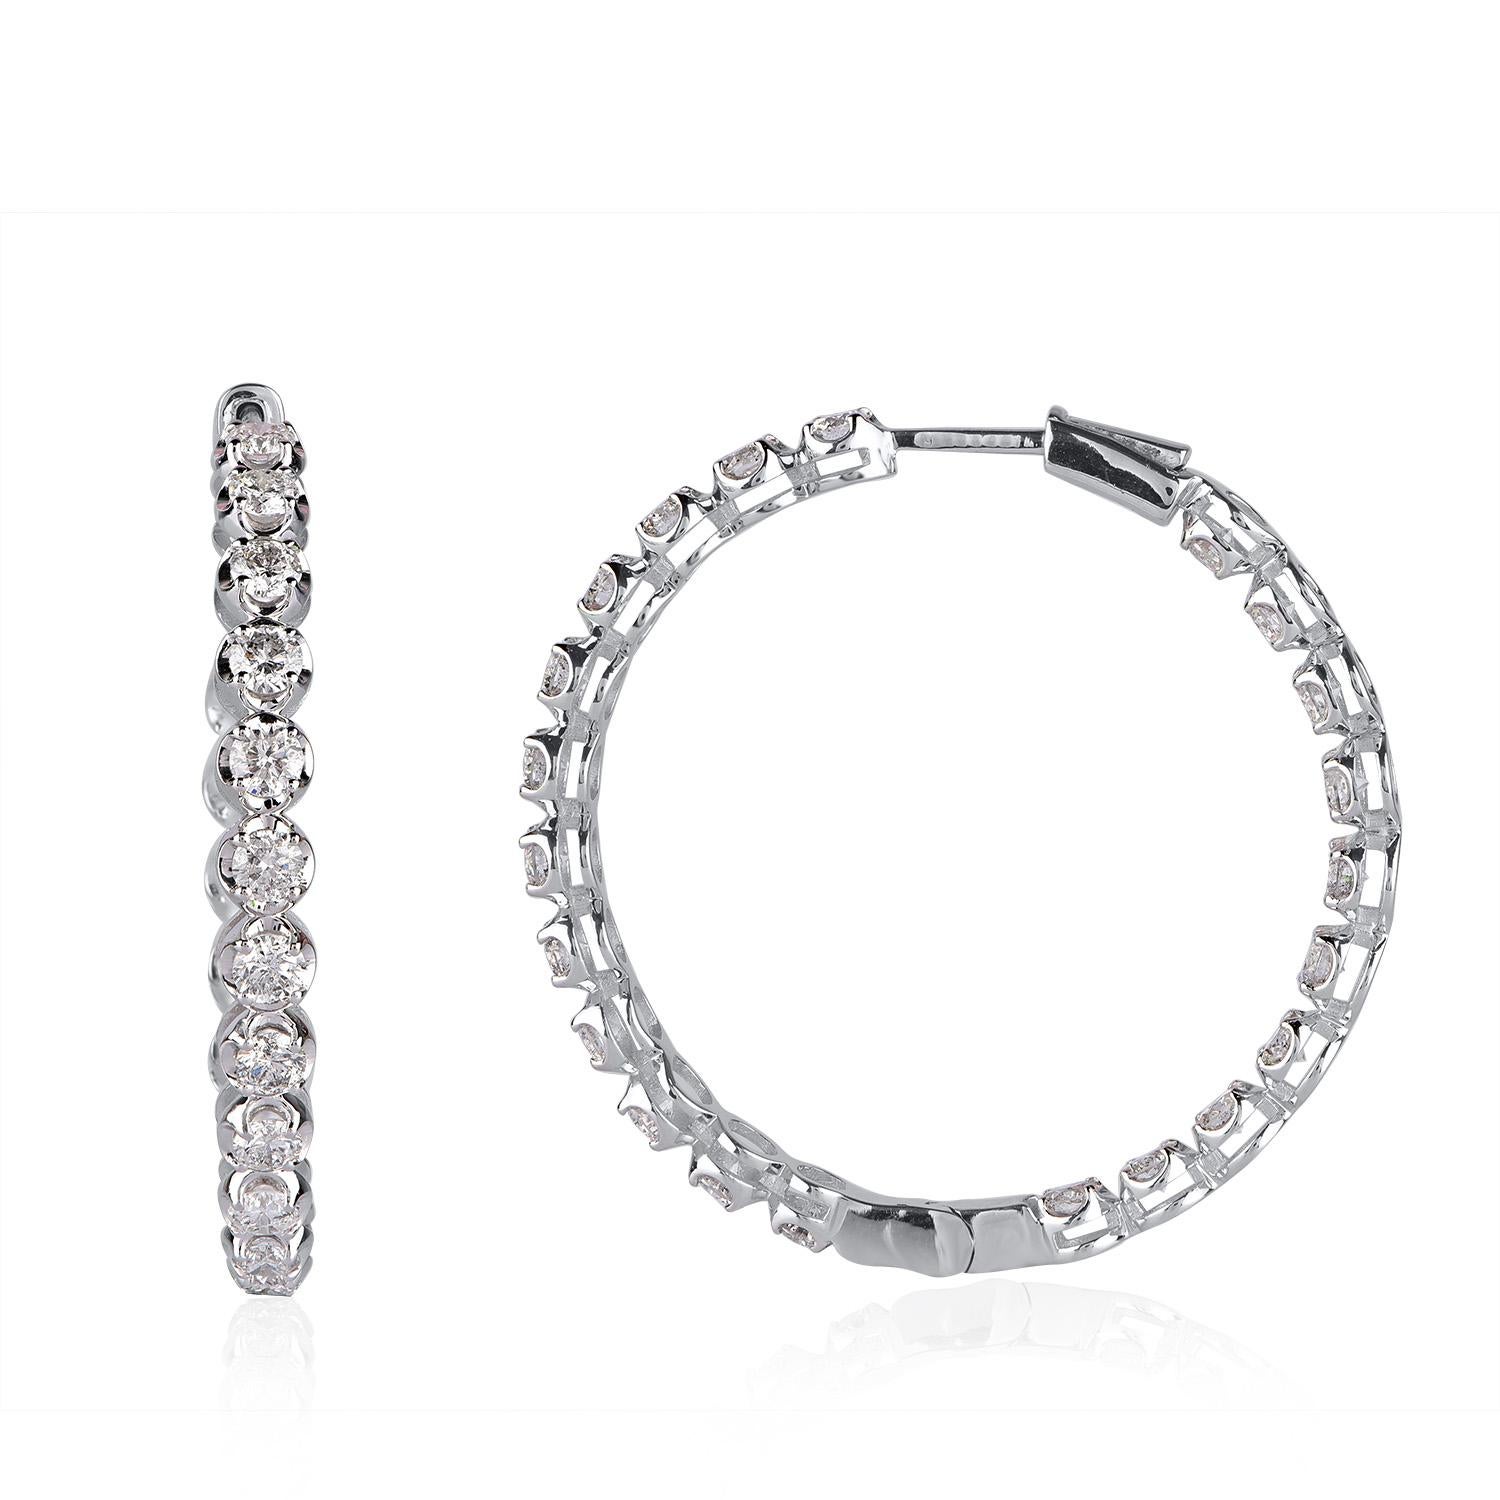 Sparkling inside-out diamond hoop earrings are intricately hand-crafted in 14 KT white gold and features 44 round diamonds set elegantly in prong setting. The diamonds are graded H-I Color, I2 Clarity. Each hoop earrings features a ribbon of petite